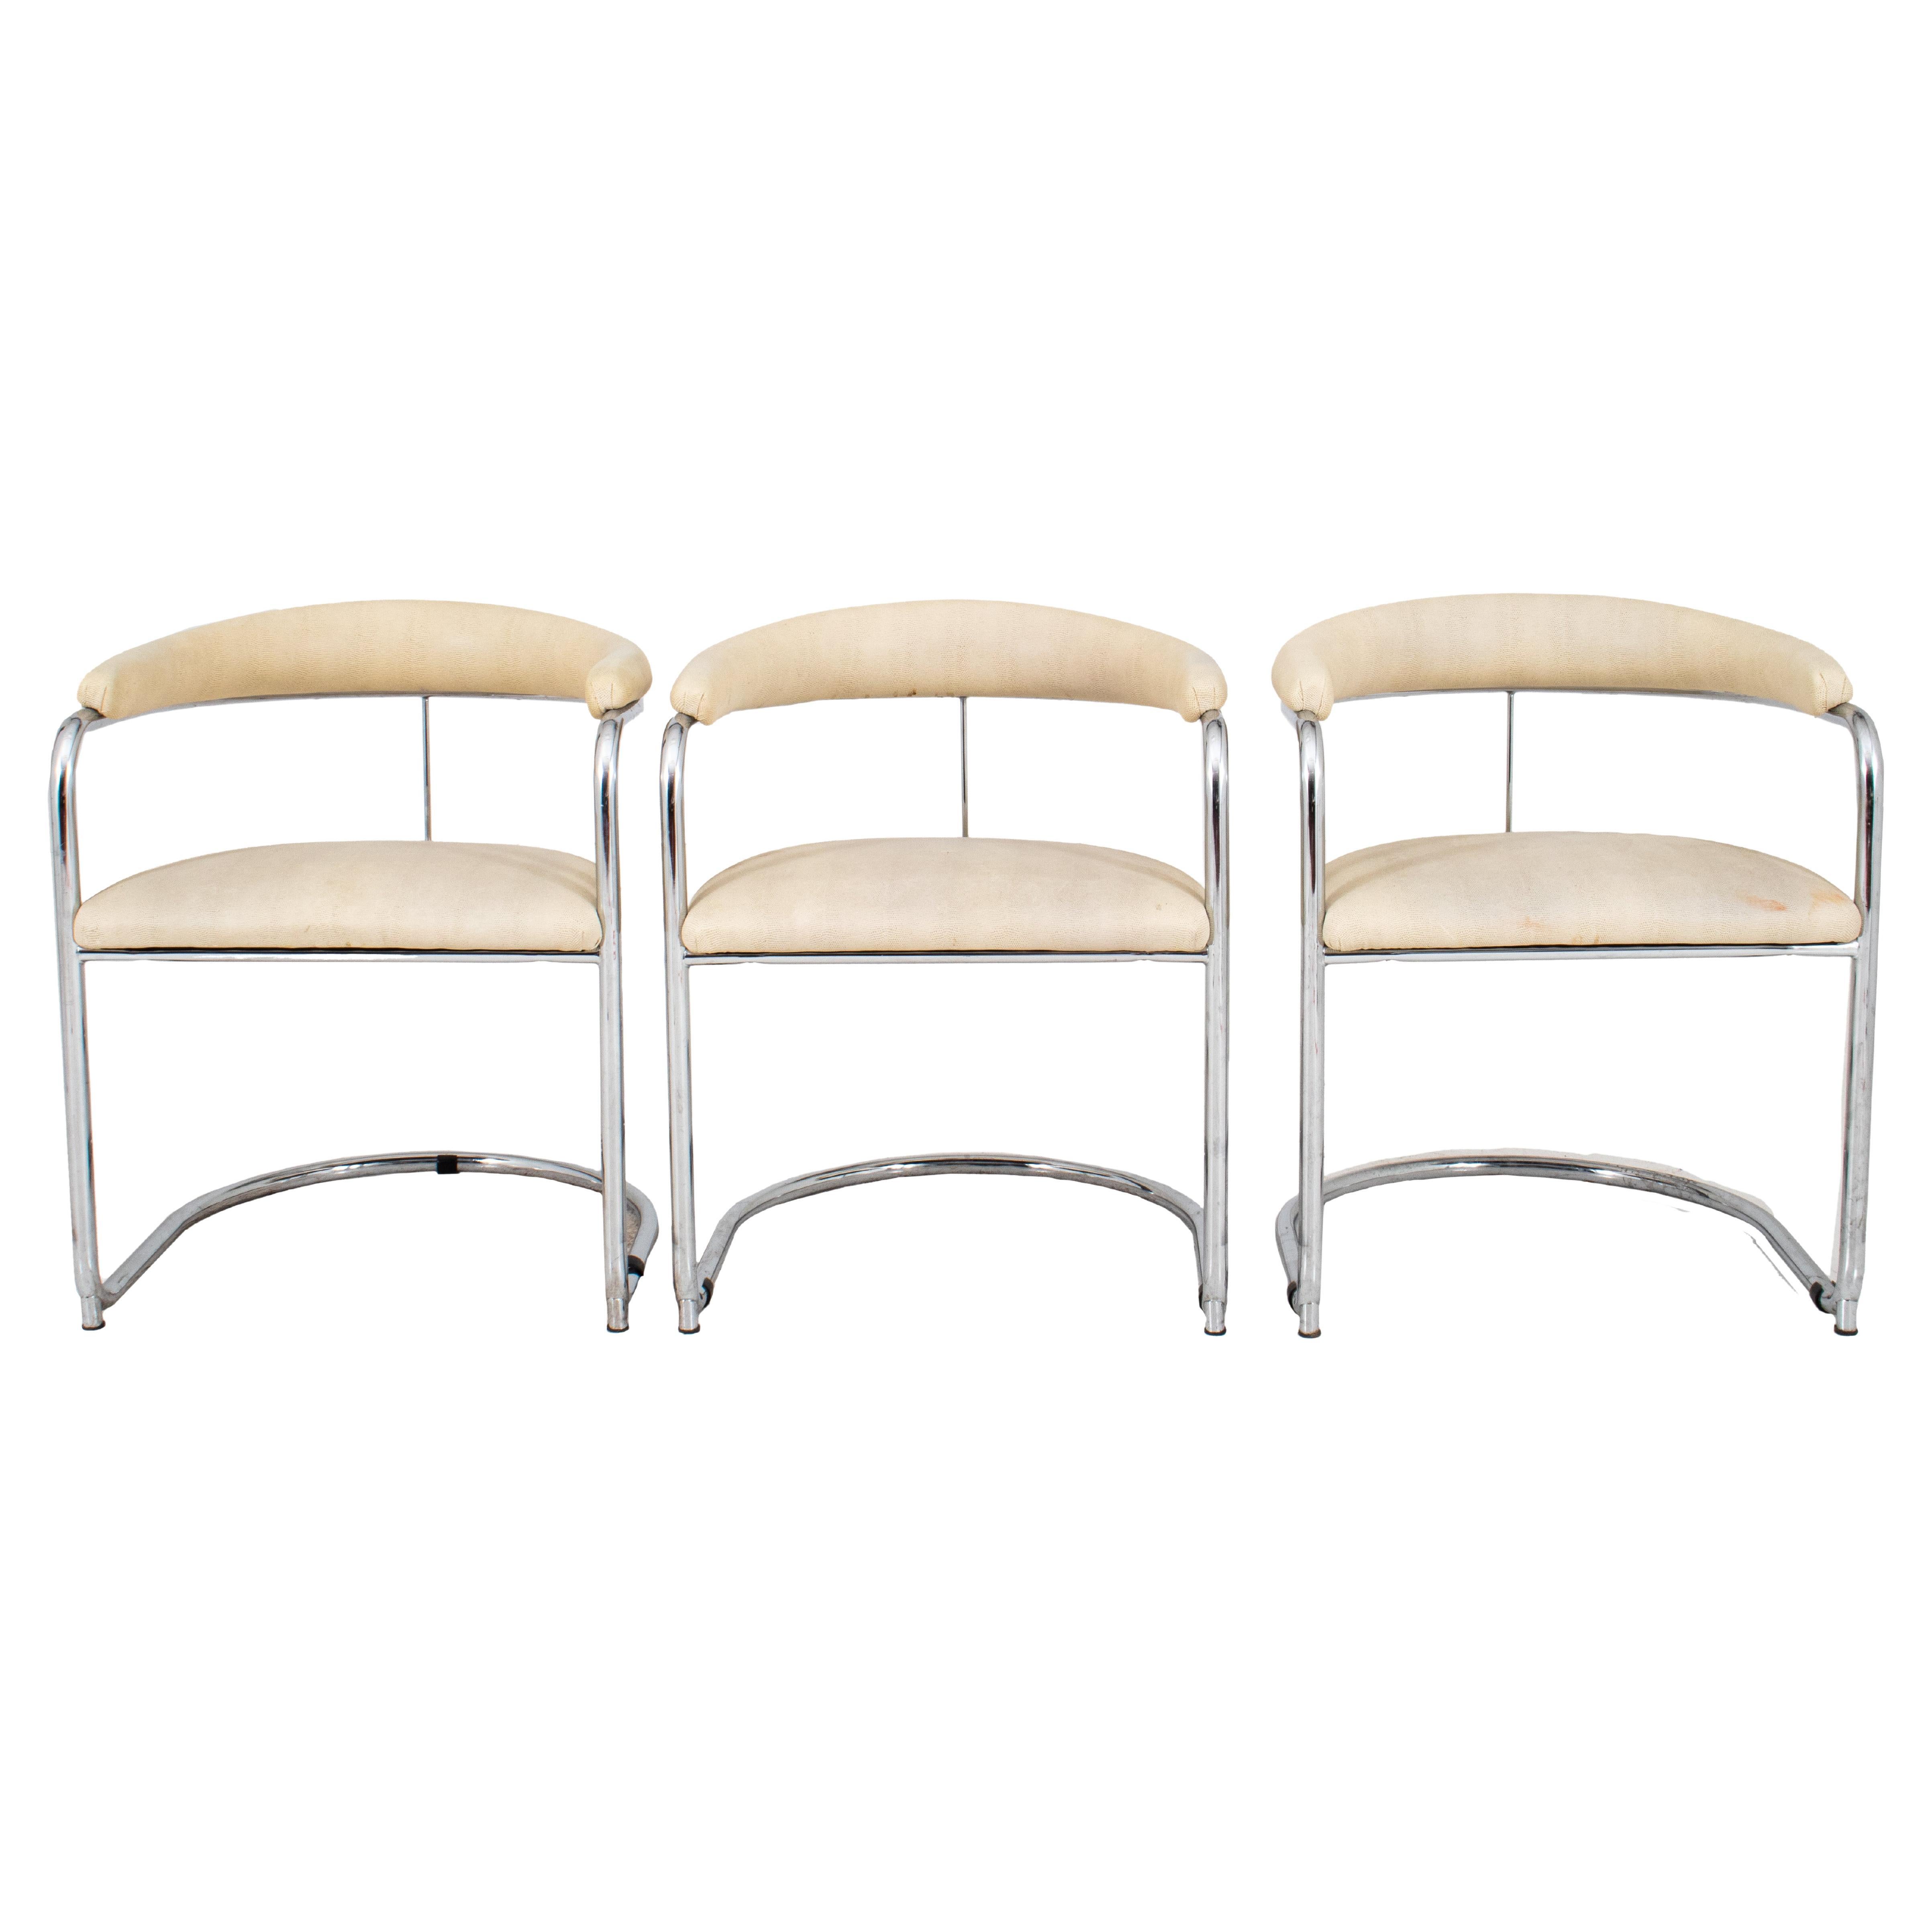 Anton Lorenz for Thonet Cantilevered Armchairs, 3